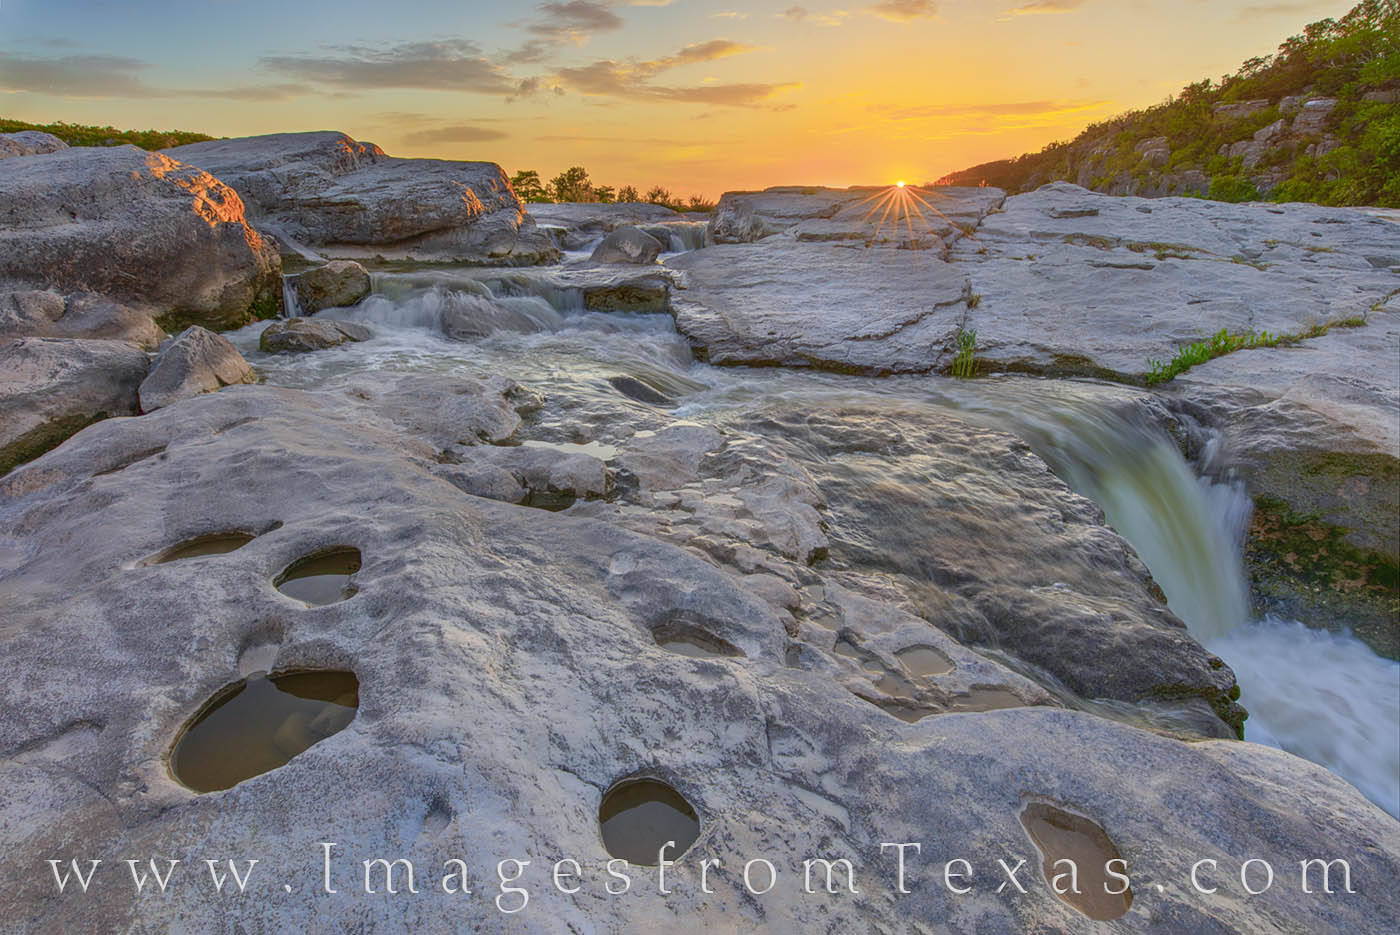 Cool water flows through the limestone rocks along the Pedernales River. Taken on a beautiful June sunset, this photograph shows...